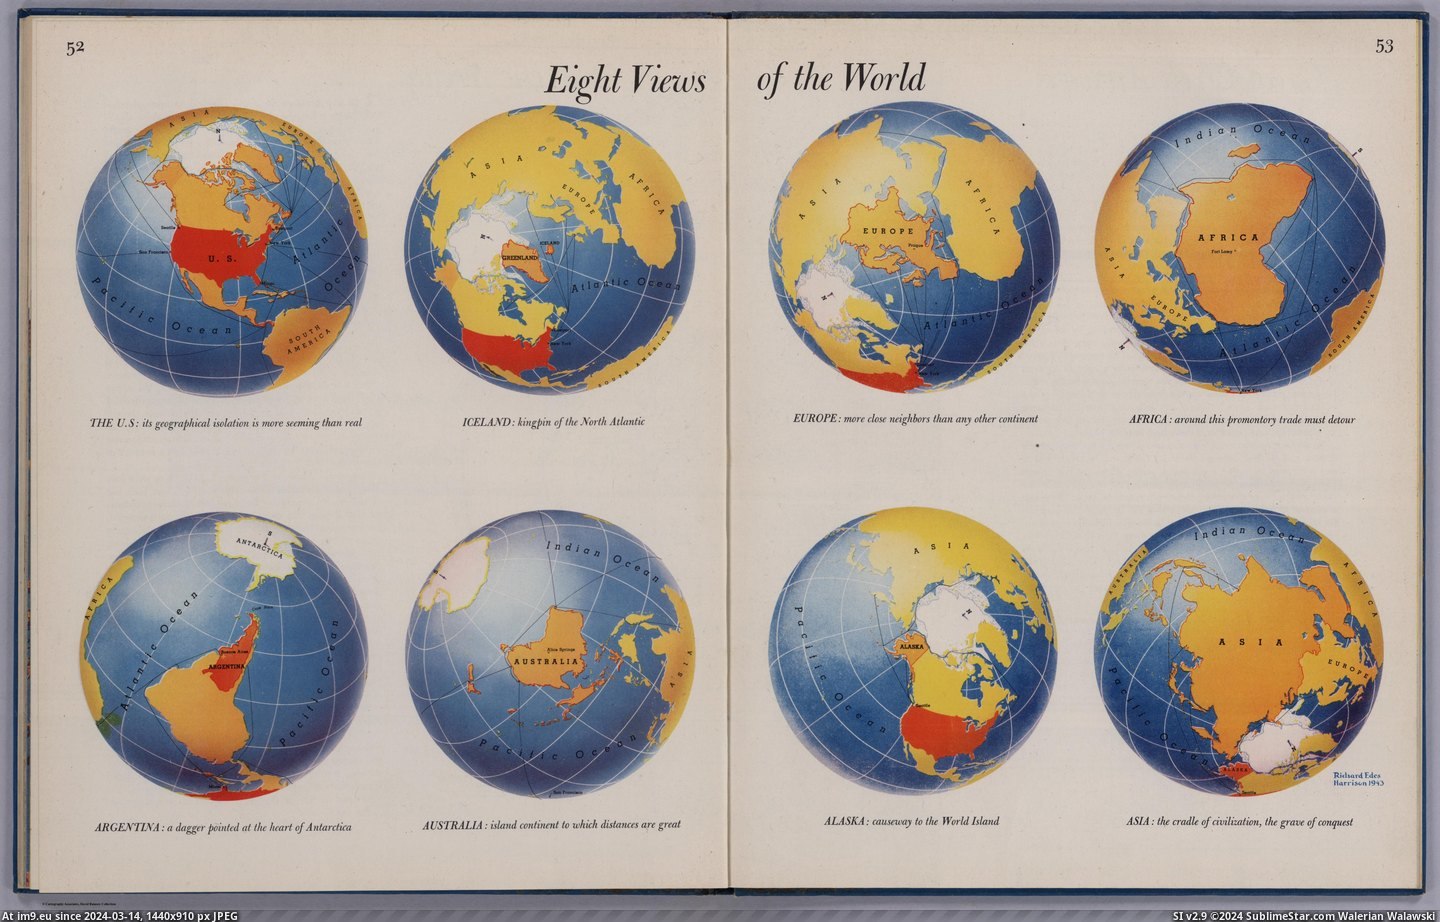 #World #Harrison #Richard [Mapporn] 8 views of the World, by Richard Harrison in 1943 [5509x3495] Pic. (Изображение из альбом My r/MAPS favs))